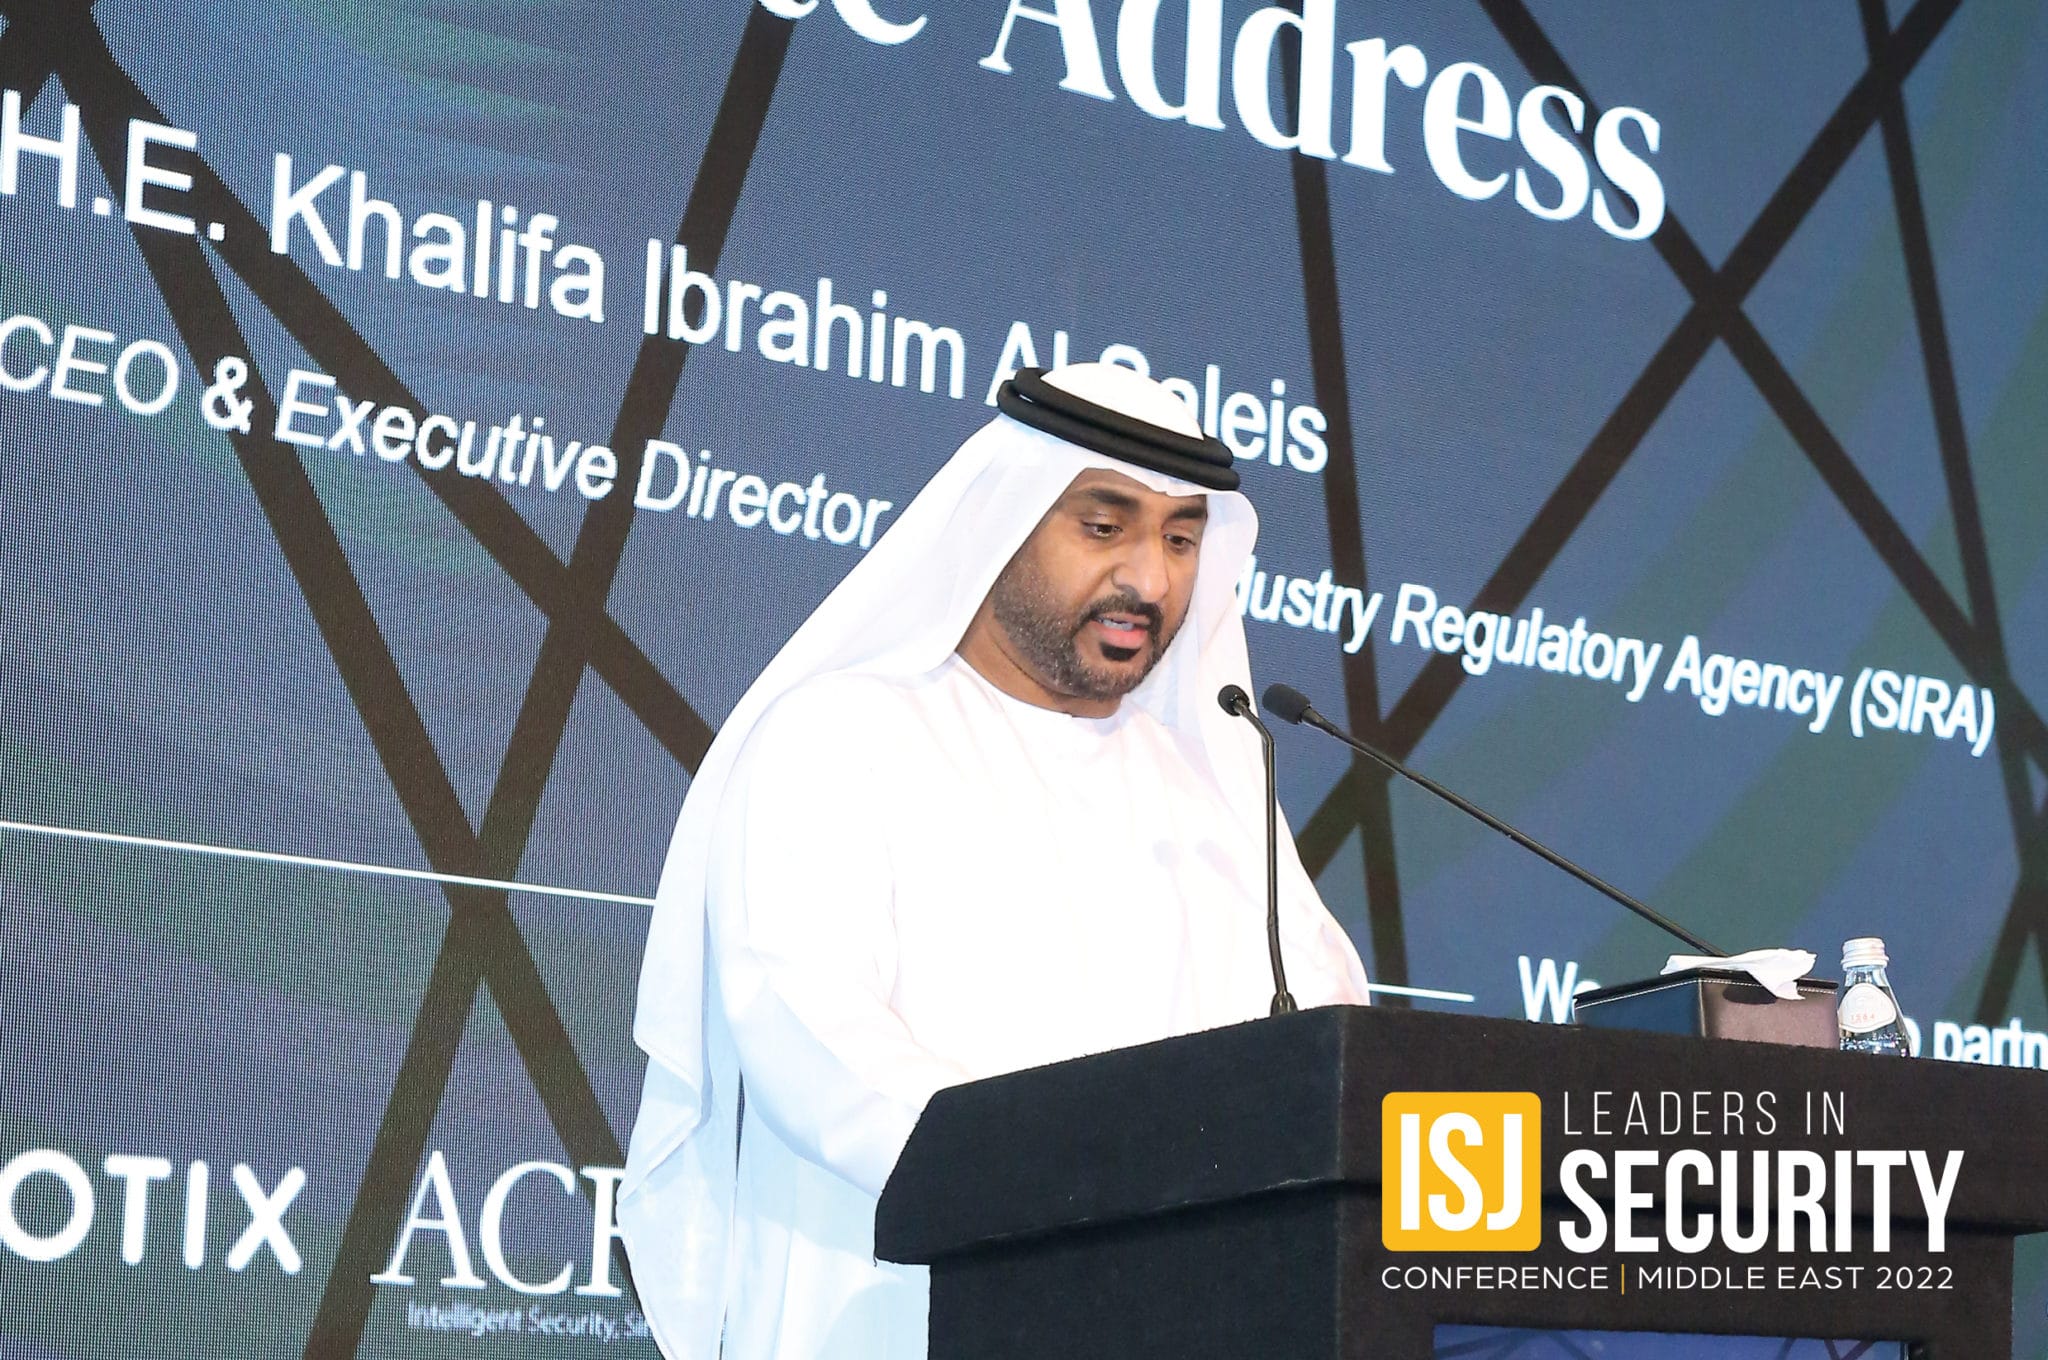 Official address from His Excellency Khalifa Ibrahim Al Saleis, CEO, SIRA